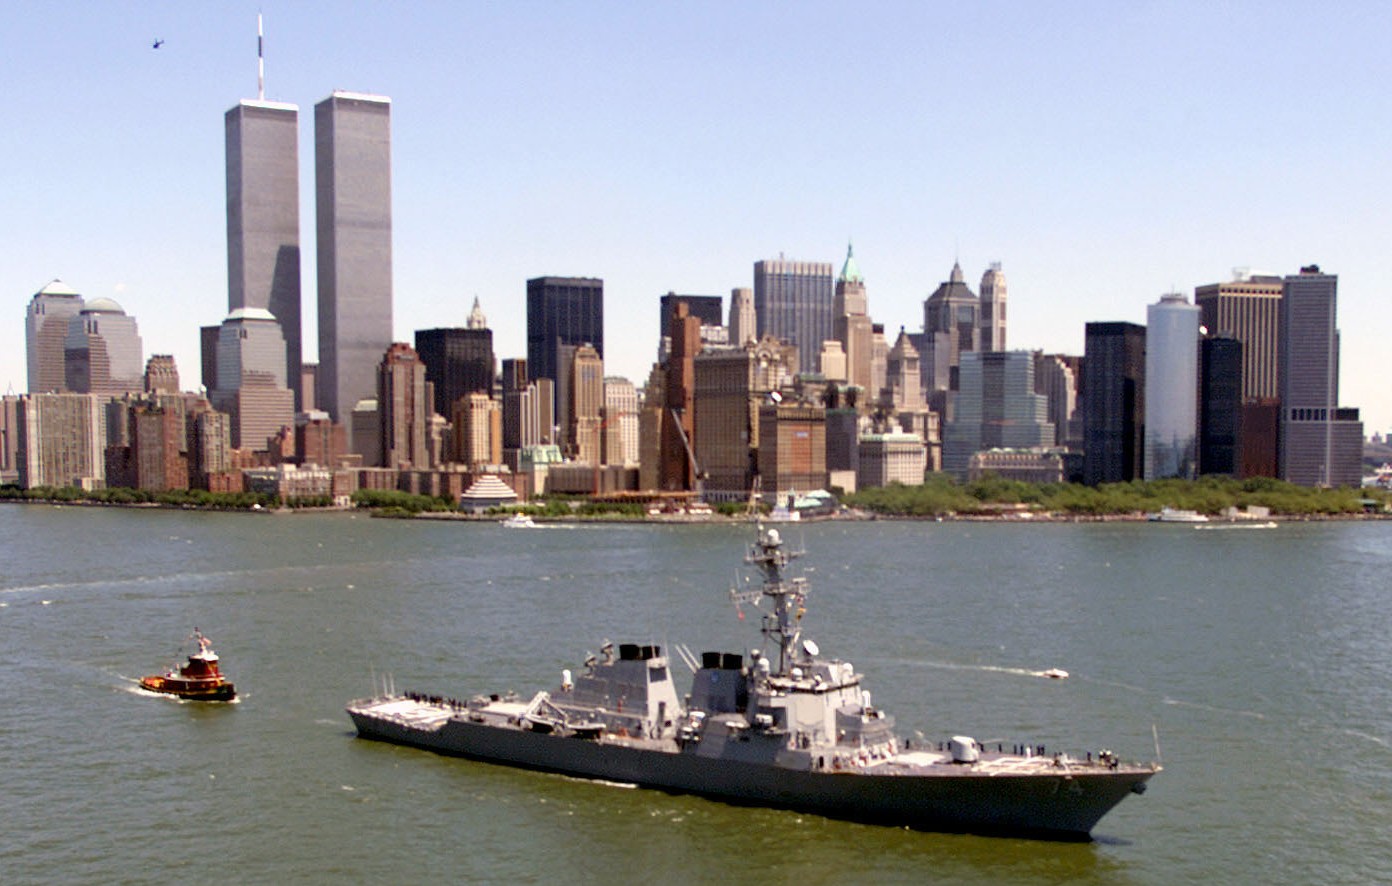 ddg-74 uss mcfaul guided missile destroyer arleigh burke class aegis bmd 64 international naval review inr new york 2000